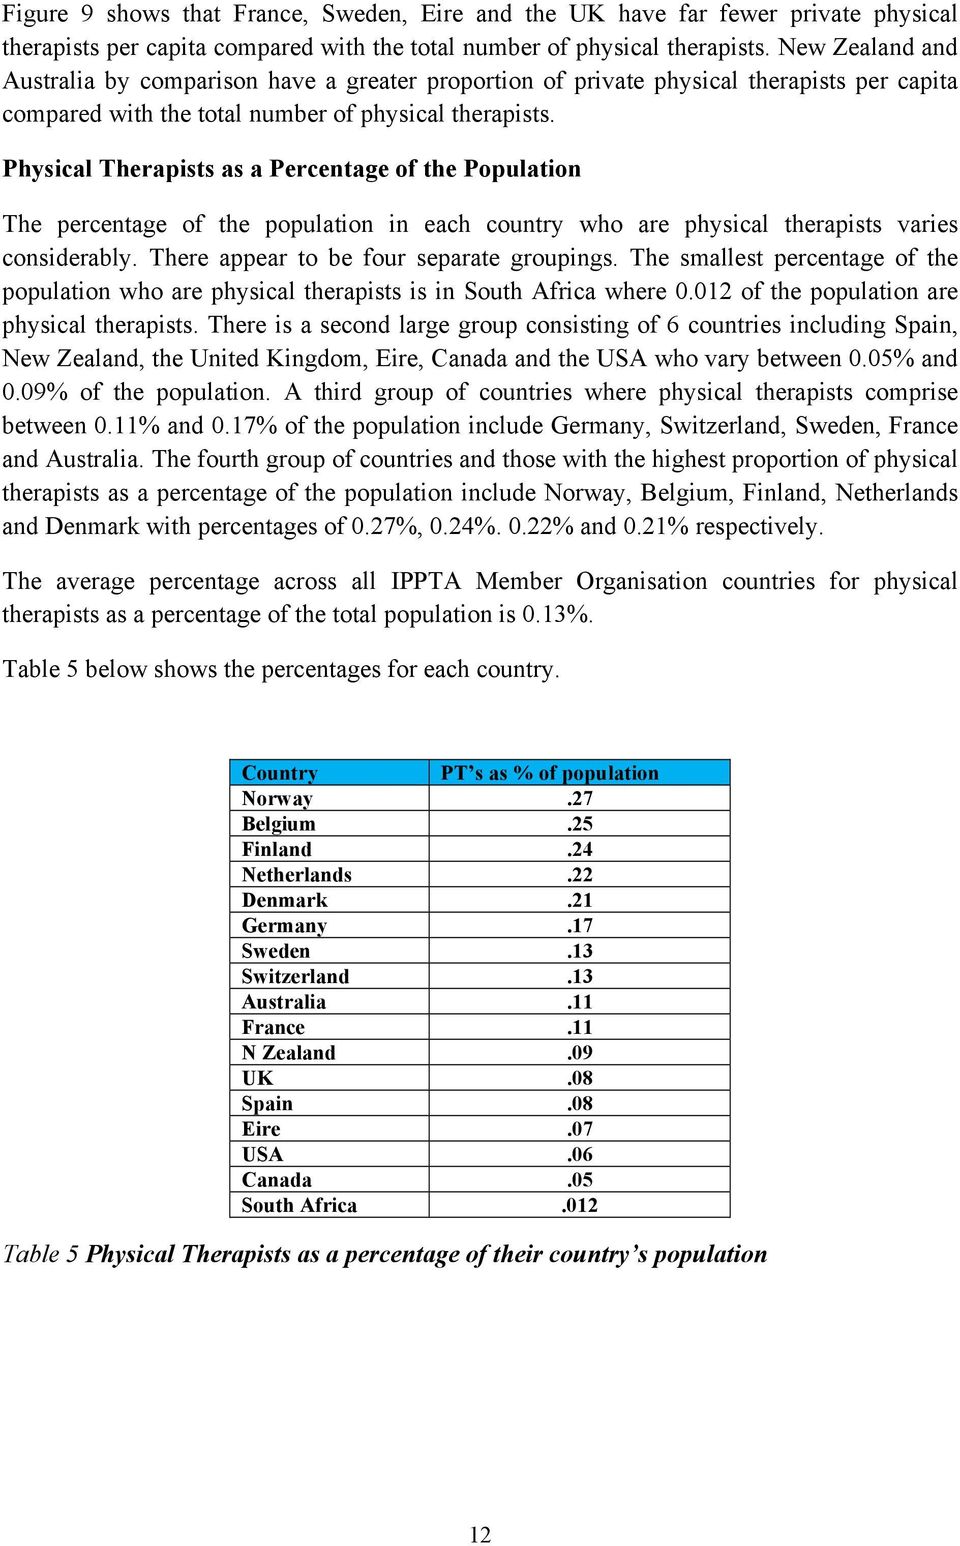 Physical Therapists as a Percentage of the Population The percentage of the population in each country who are physical therapists varies considerably. There appear to be four separate groupings.